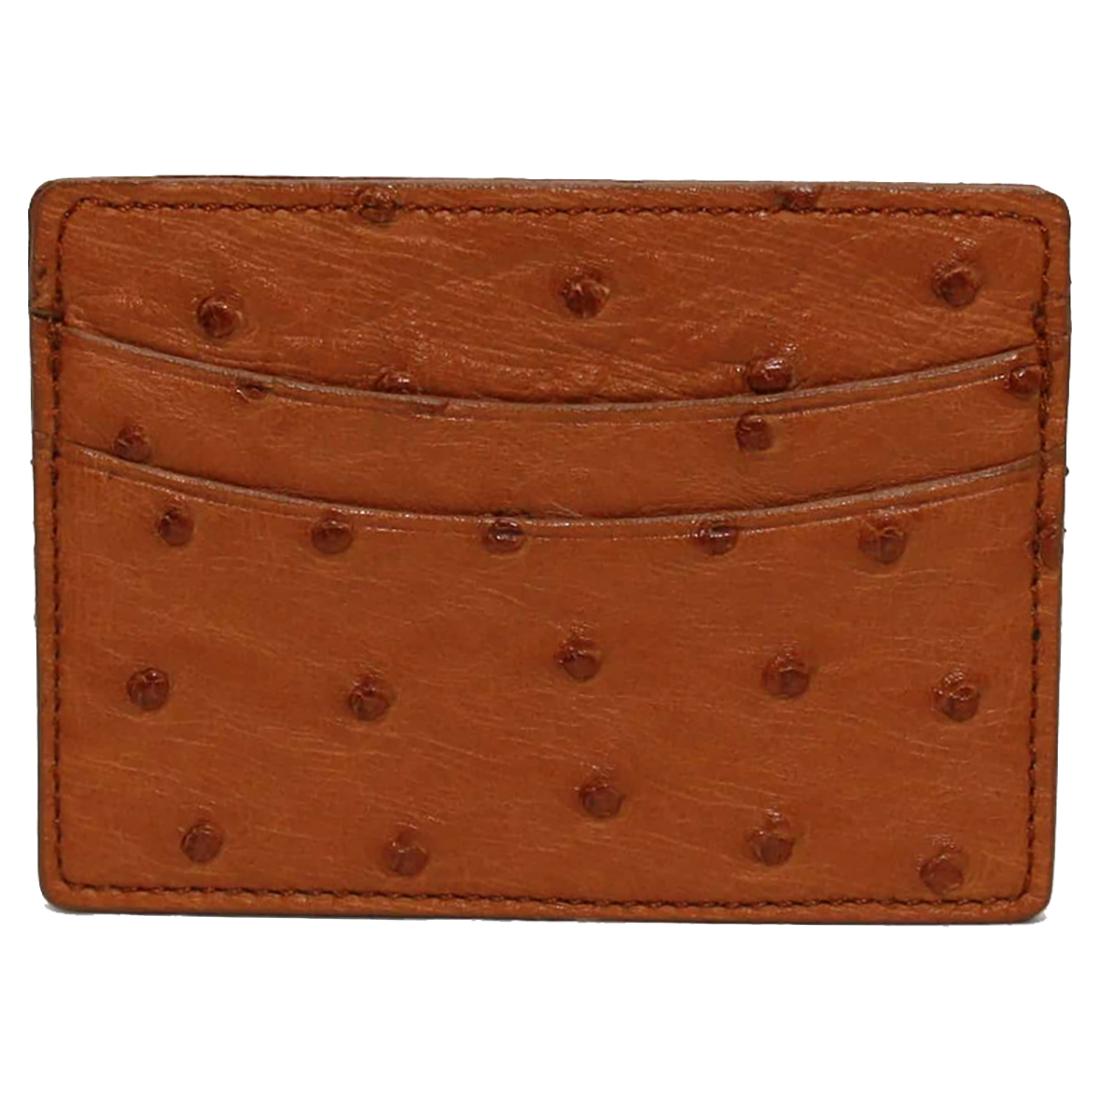  Business Card Id Case Saddle Ostrich